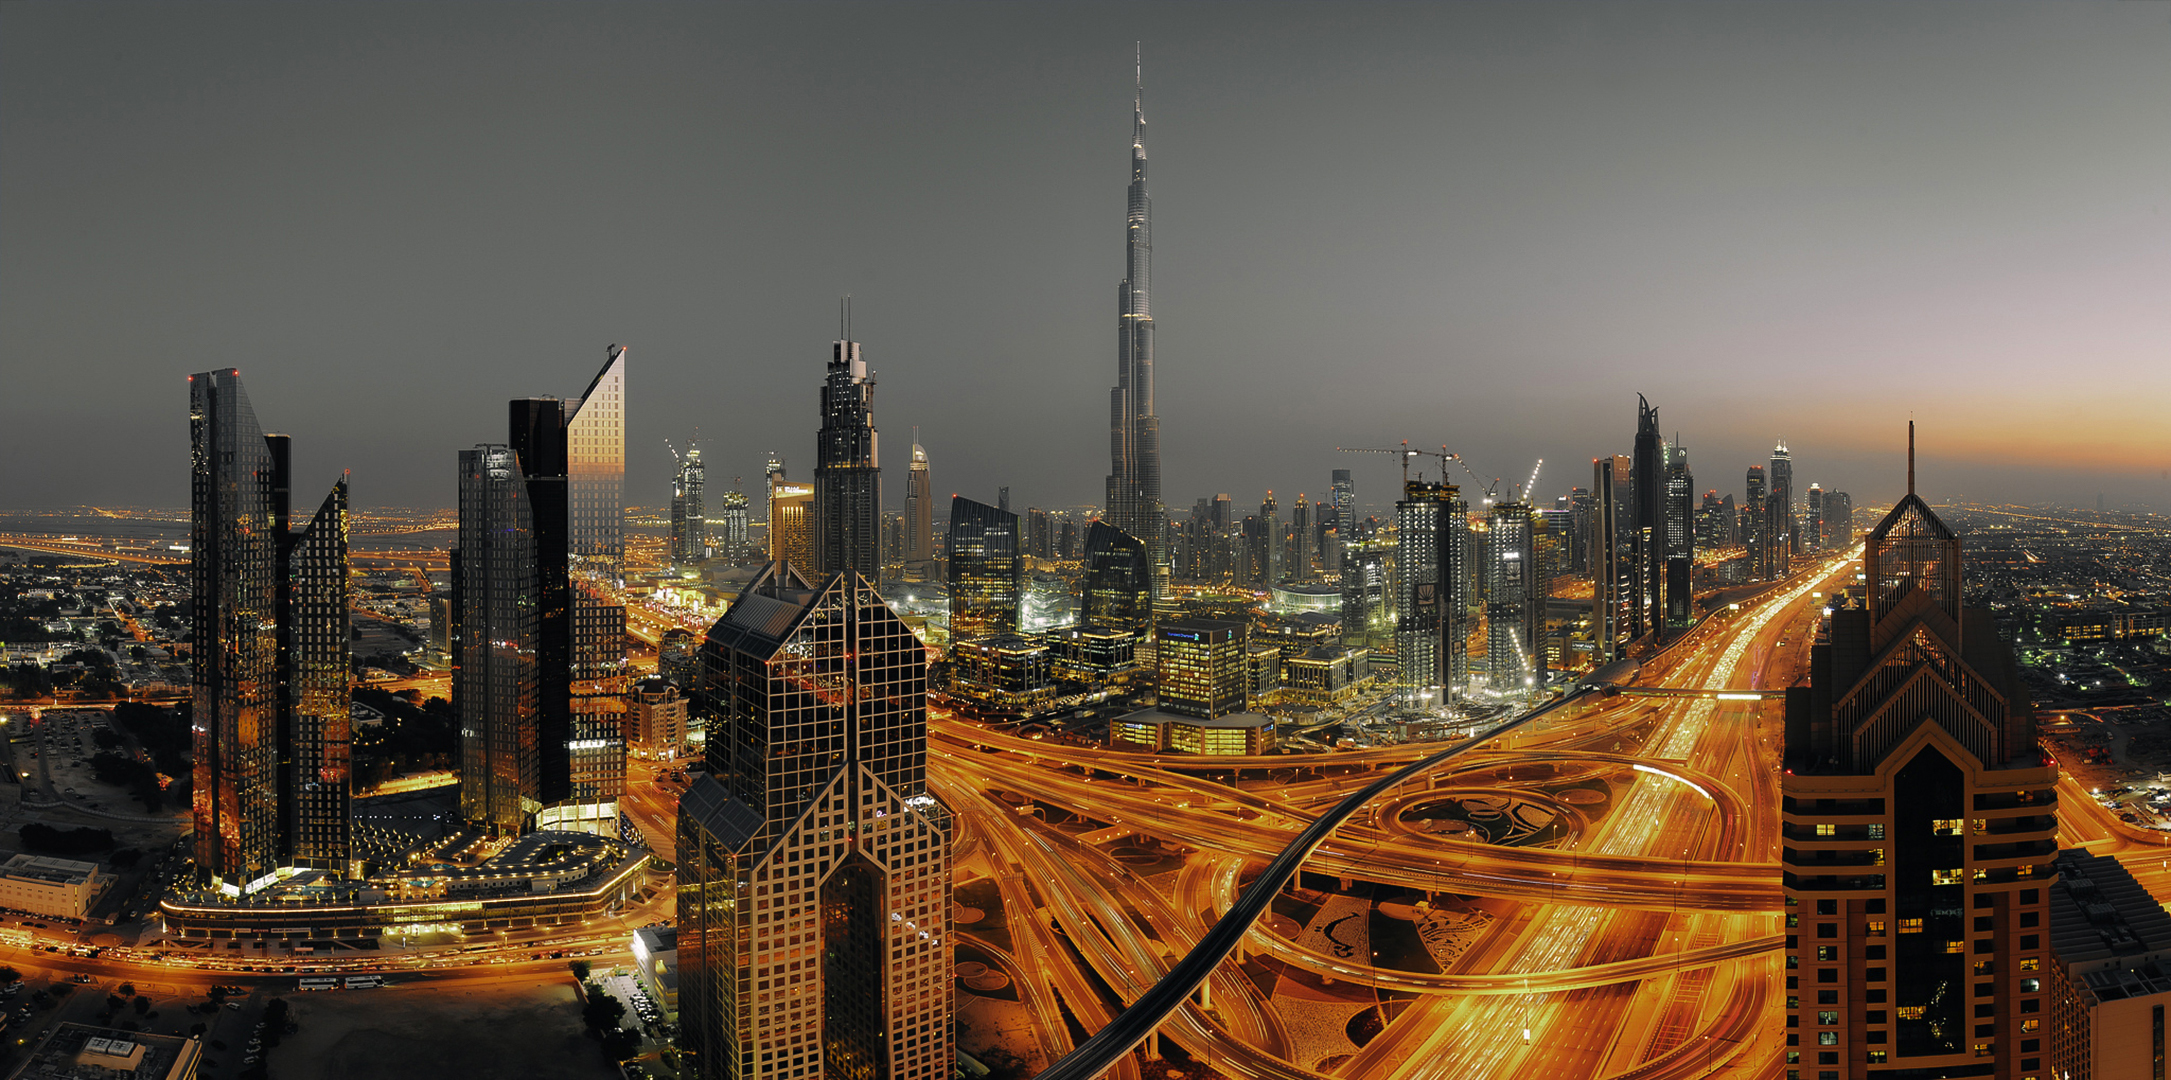 Download mobile wallpaper Cities, Night, City, Skyscraper, Building, Dubai, Cityscape, United Arab Emirates, Highway, Man Made for free.